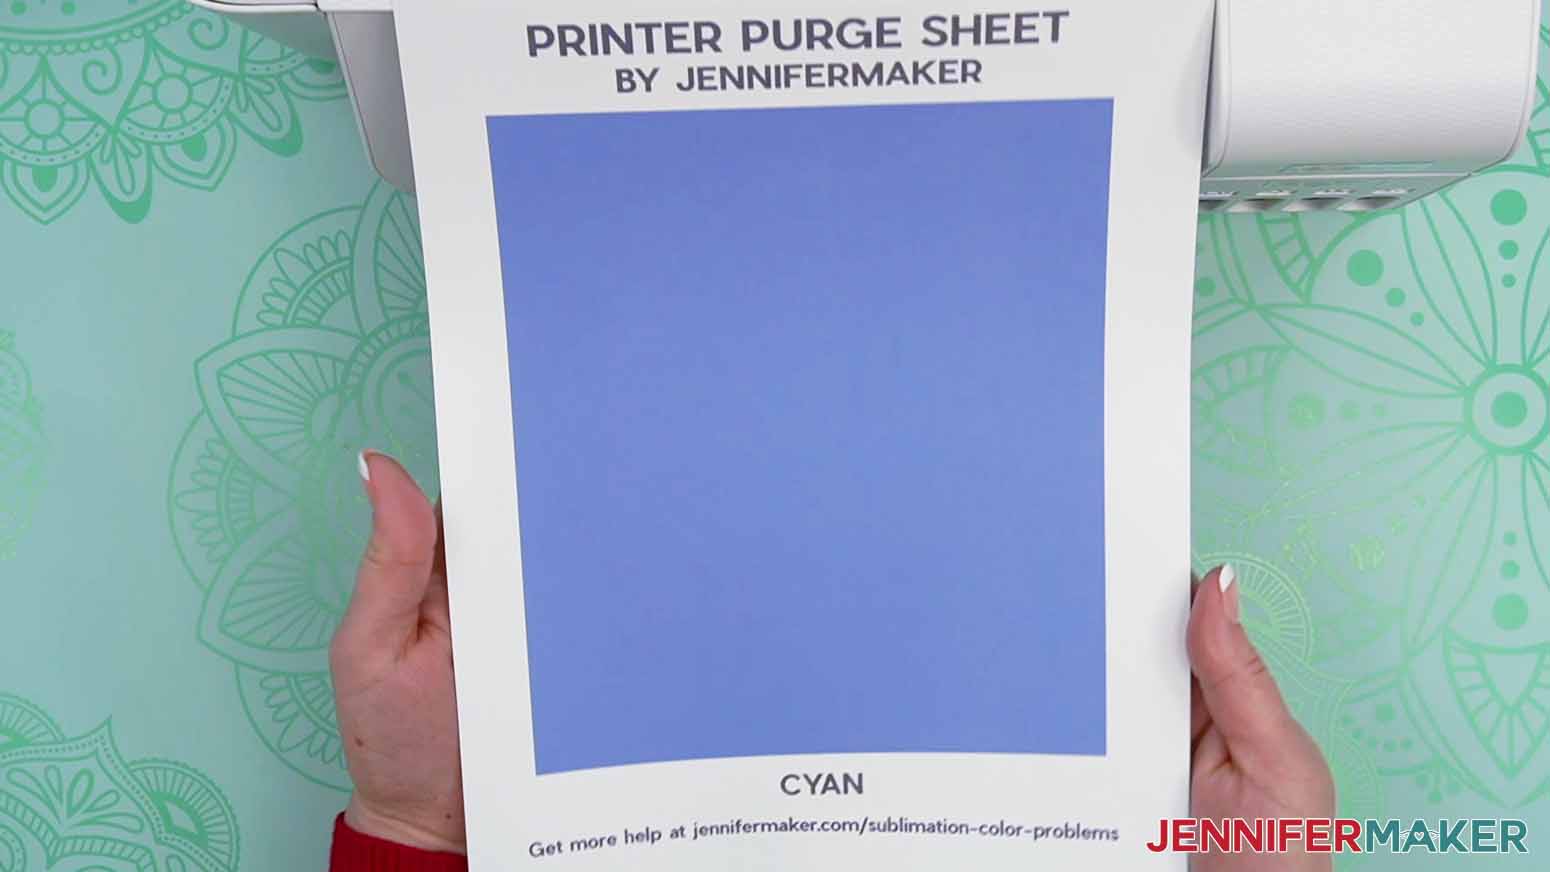 Once the printed sheet has dried, label it to keep track of your progress, then look closely at it.